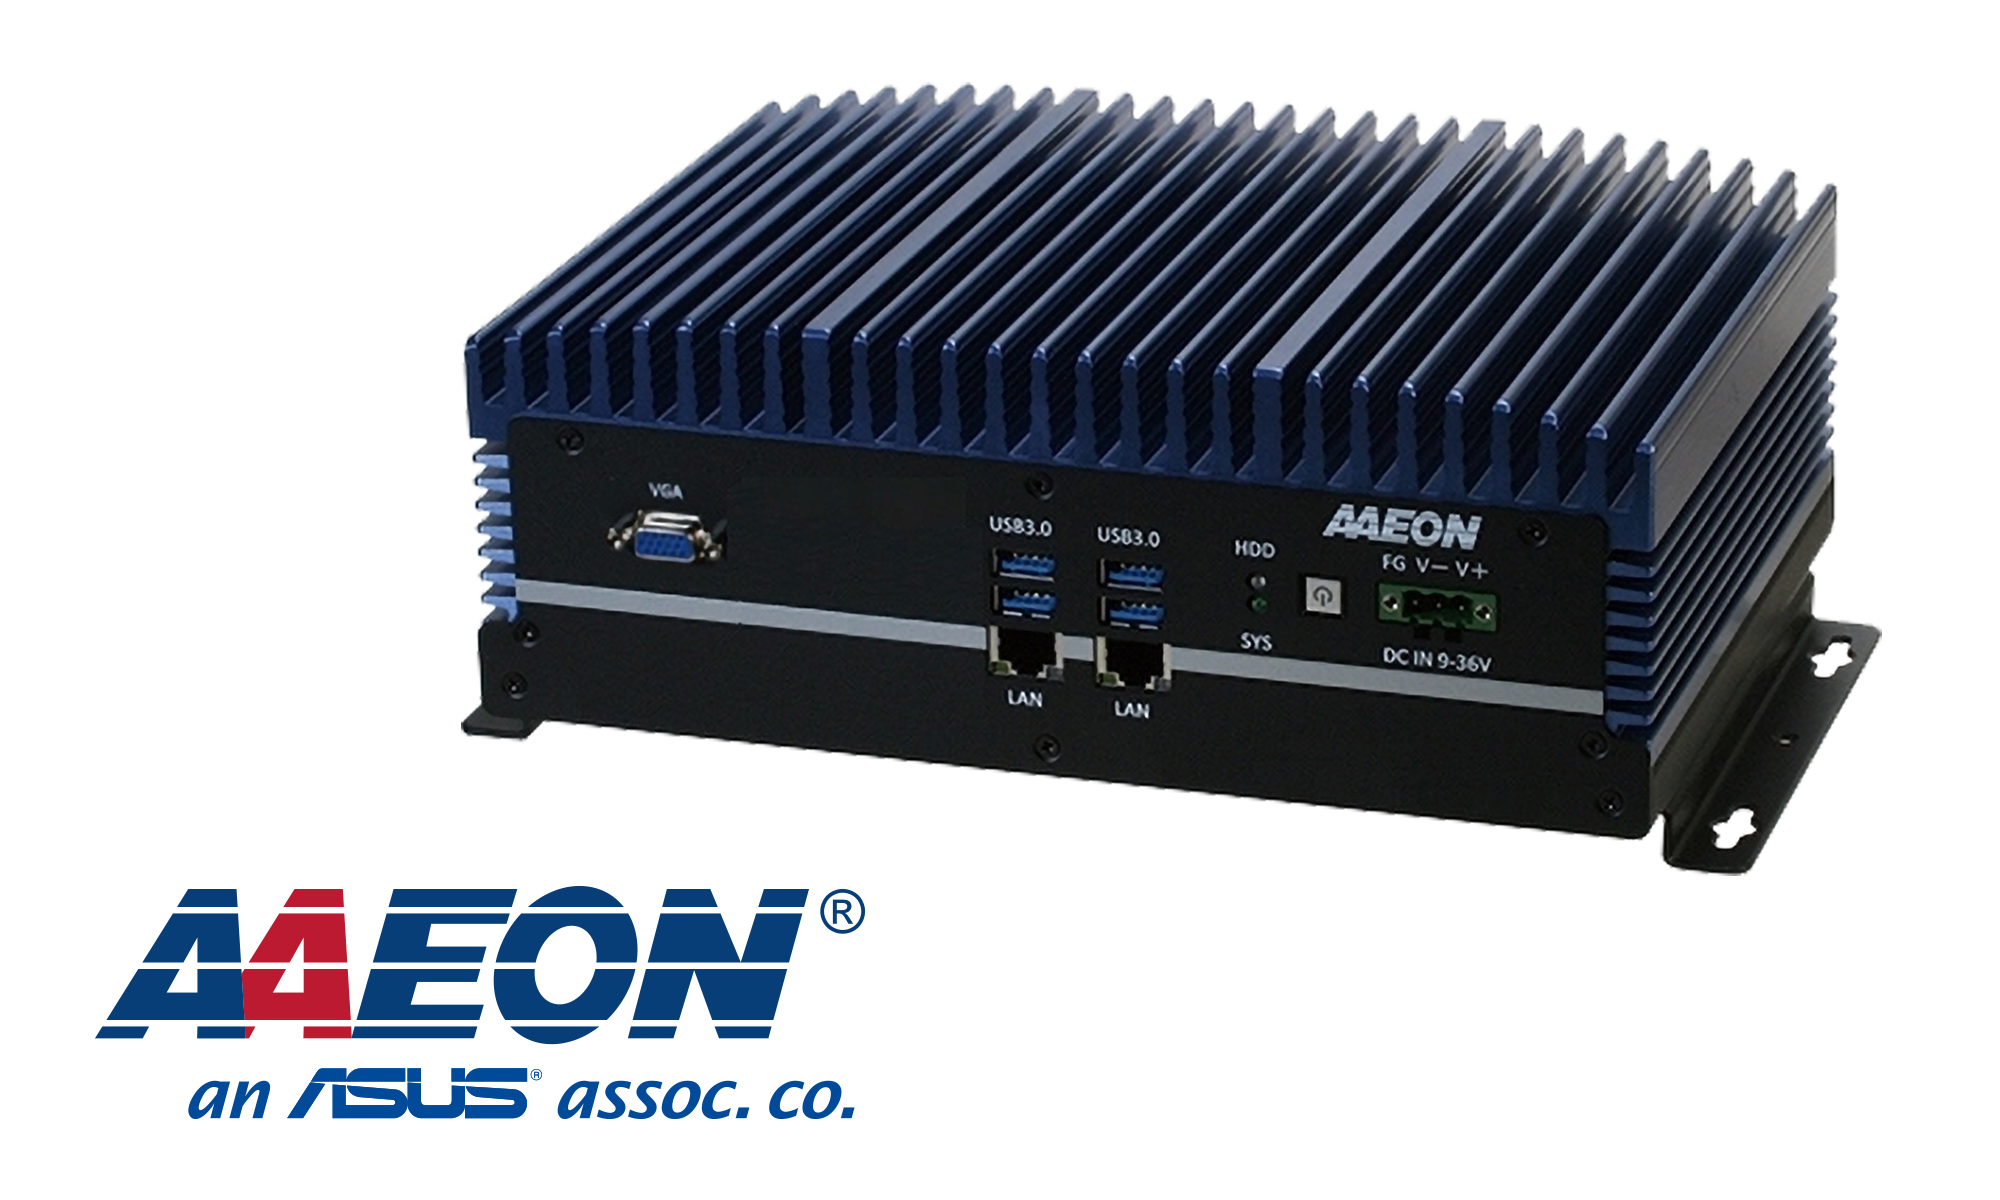 BOXER series industrial PCs by AAEON